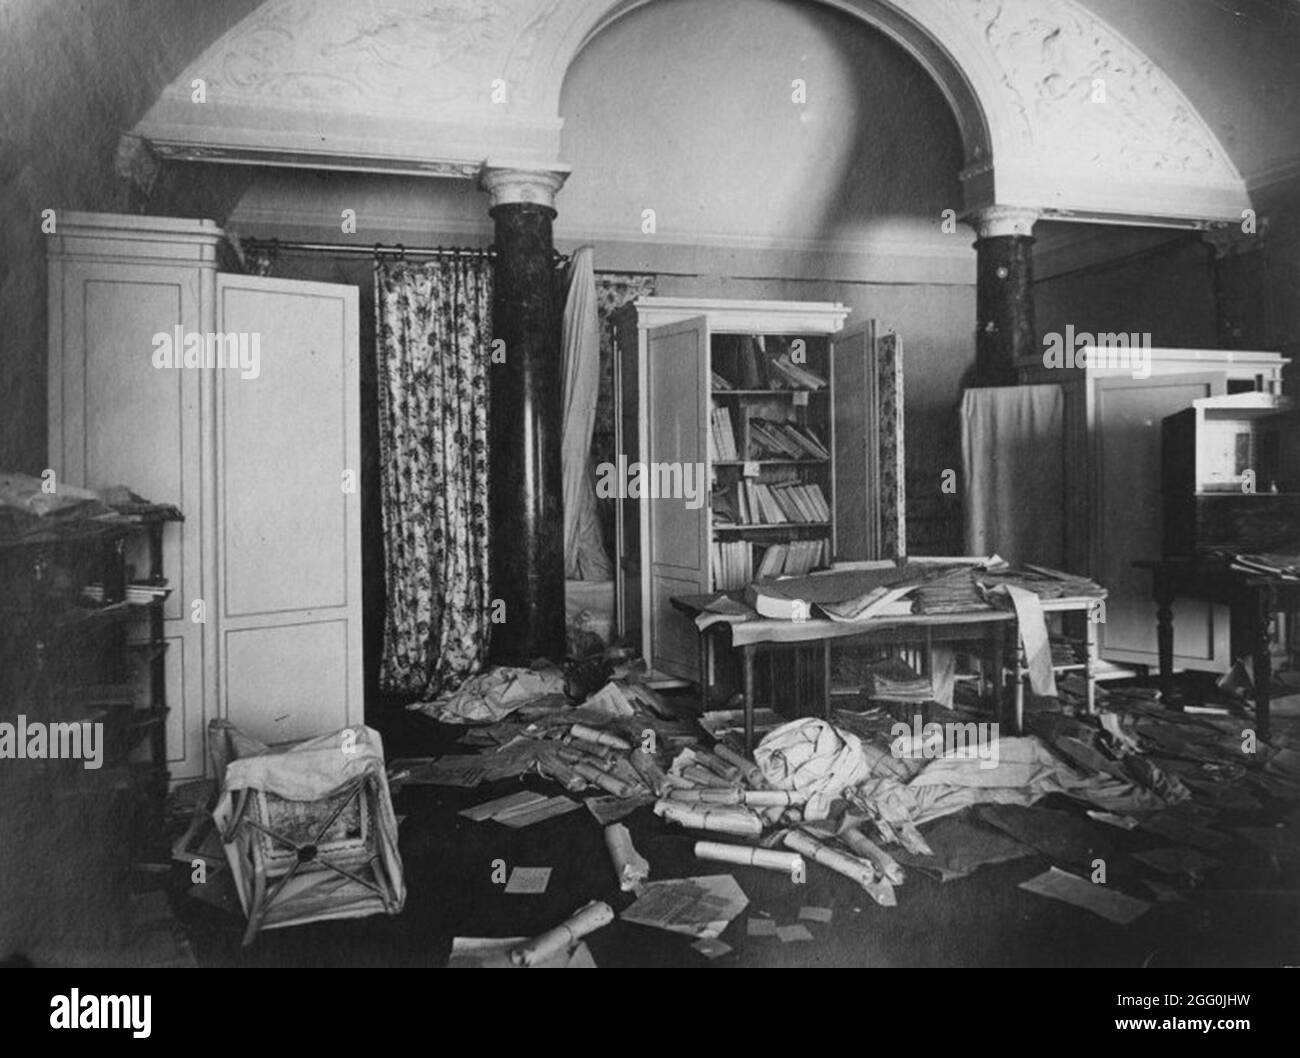 The Winter Palace in St Petersburg looted and damaged after the October Revolution. Saint Petersburg, Russia, 8th November 1917. Stock Photo